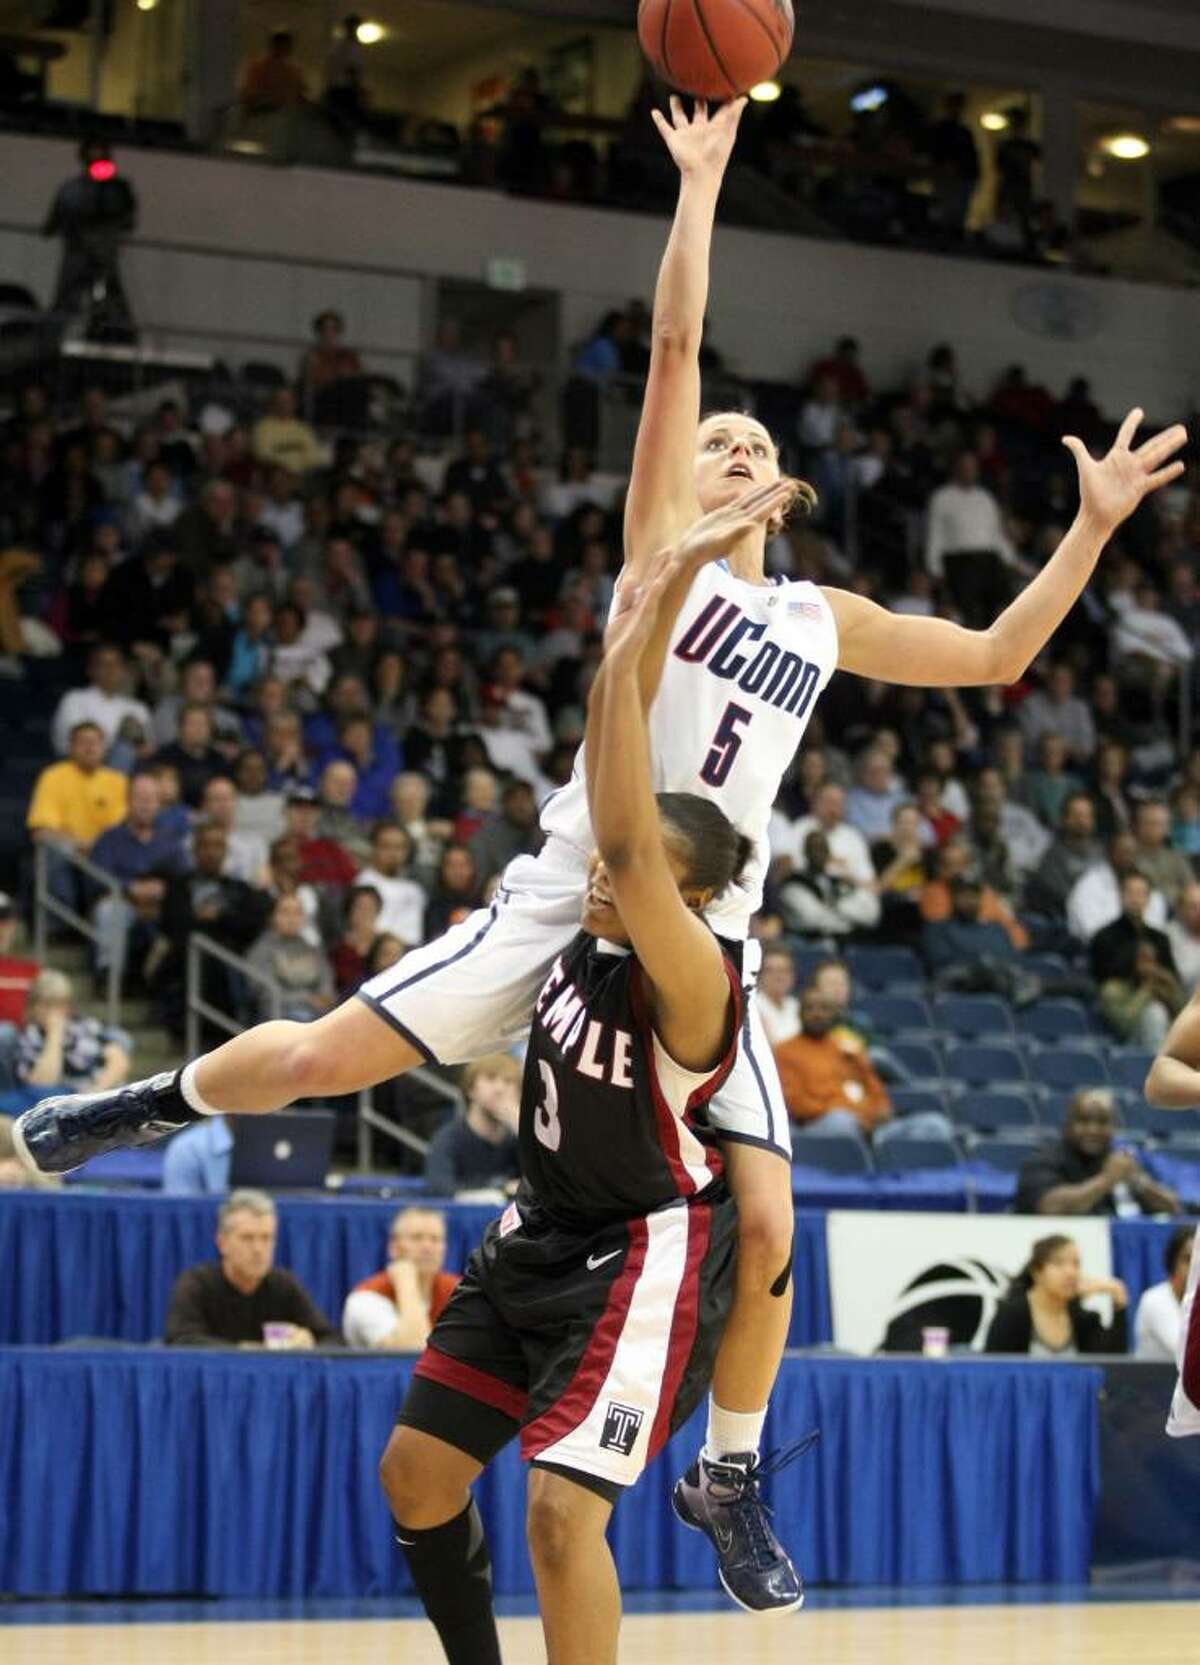 Connecticut's Caroline Doty is fouled by Temple's B.J. Williams in the first half of an NCAA college basketball tournament game, Tuesday, March 23, 2010, in Norfolk, Va. (AP Photo/Jason Hirschfeld)